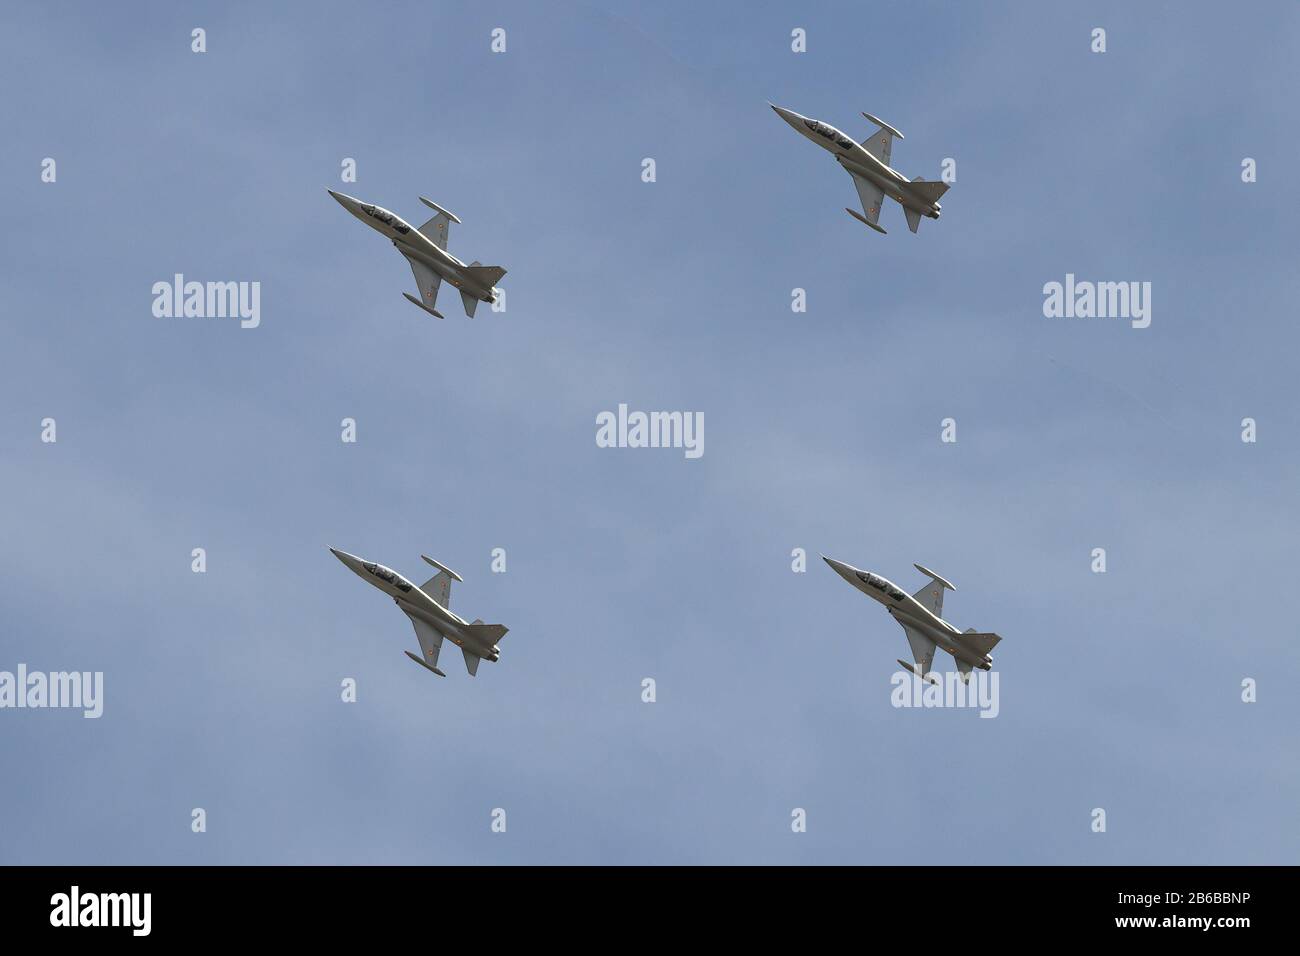 Spanish air force Fighter jet planes on display Stock Photo